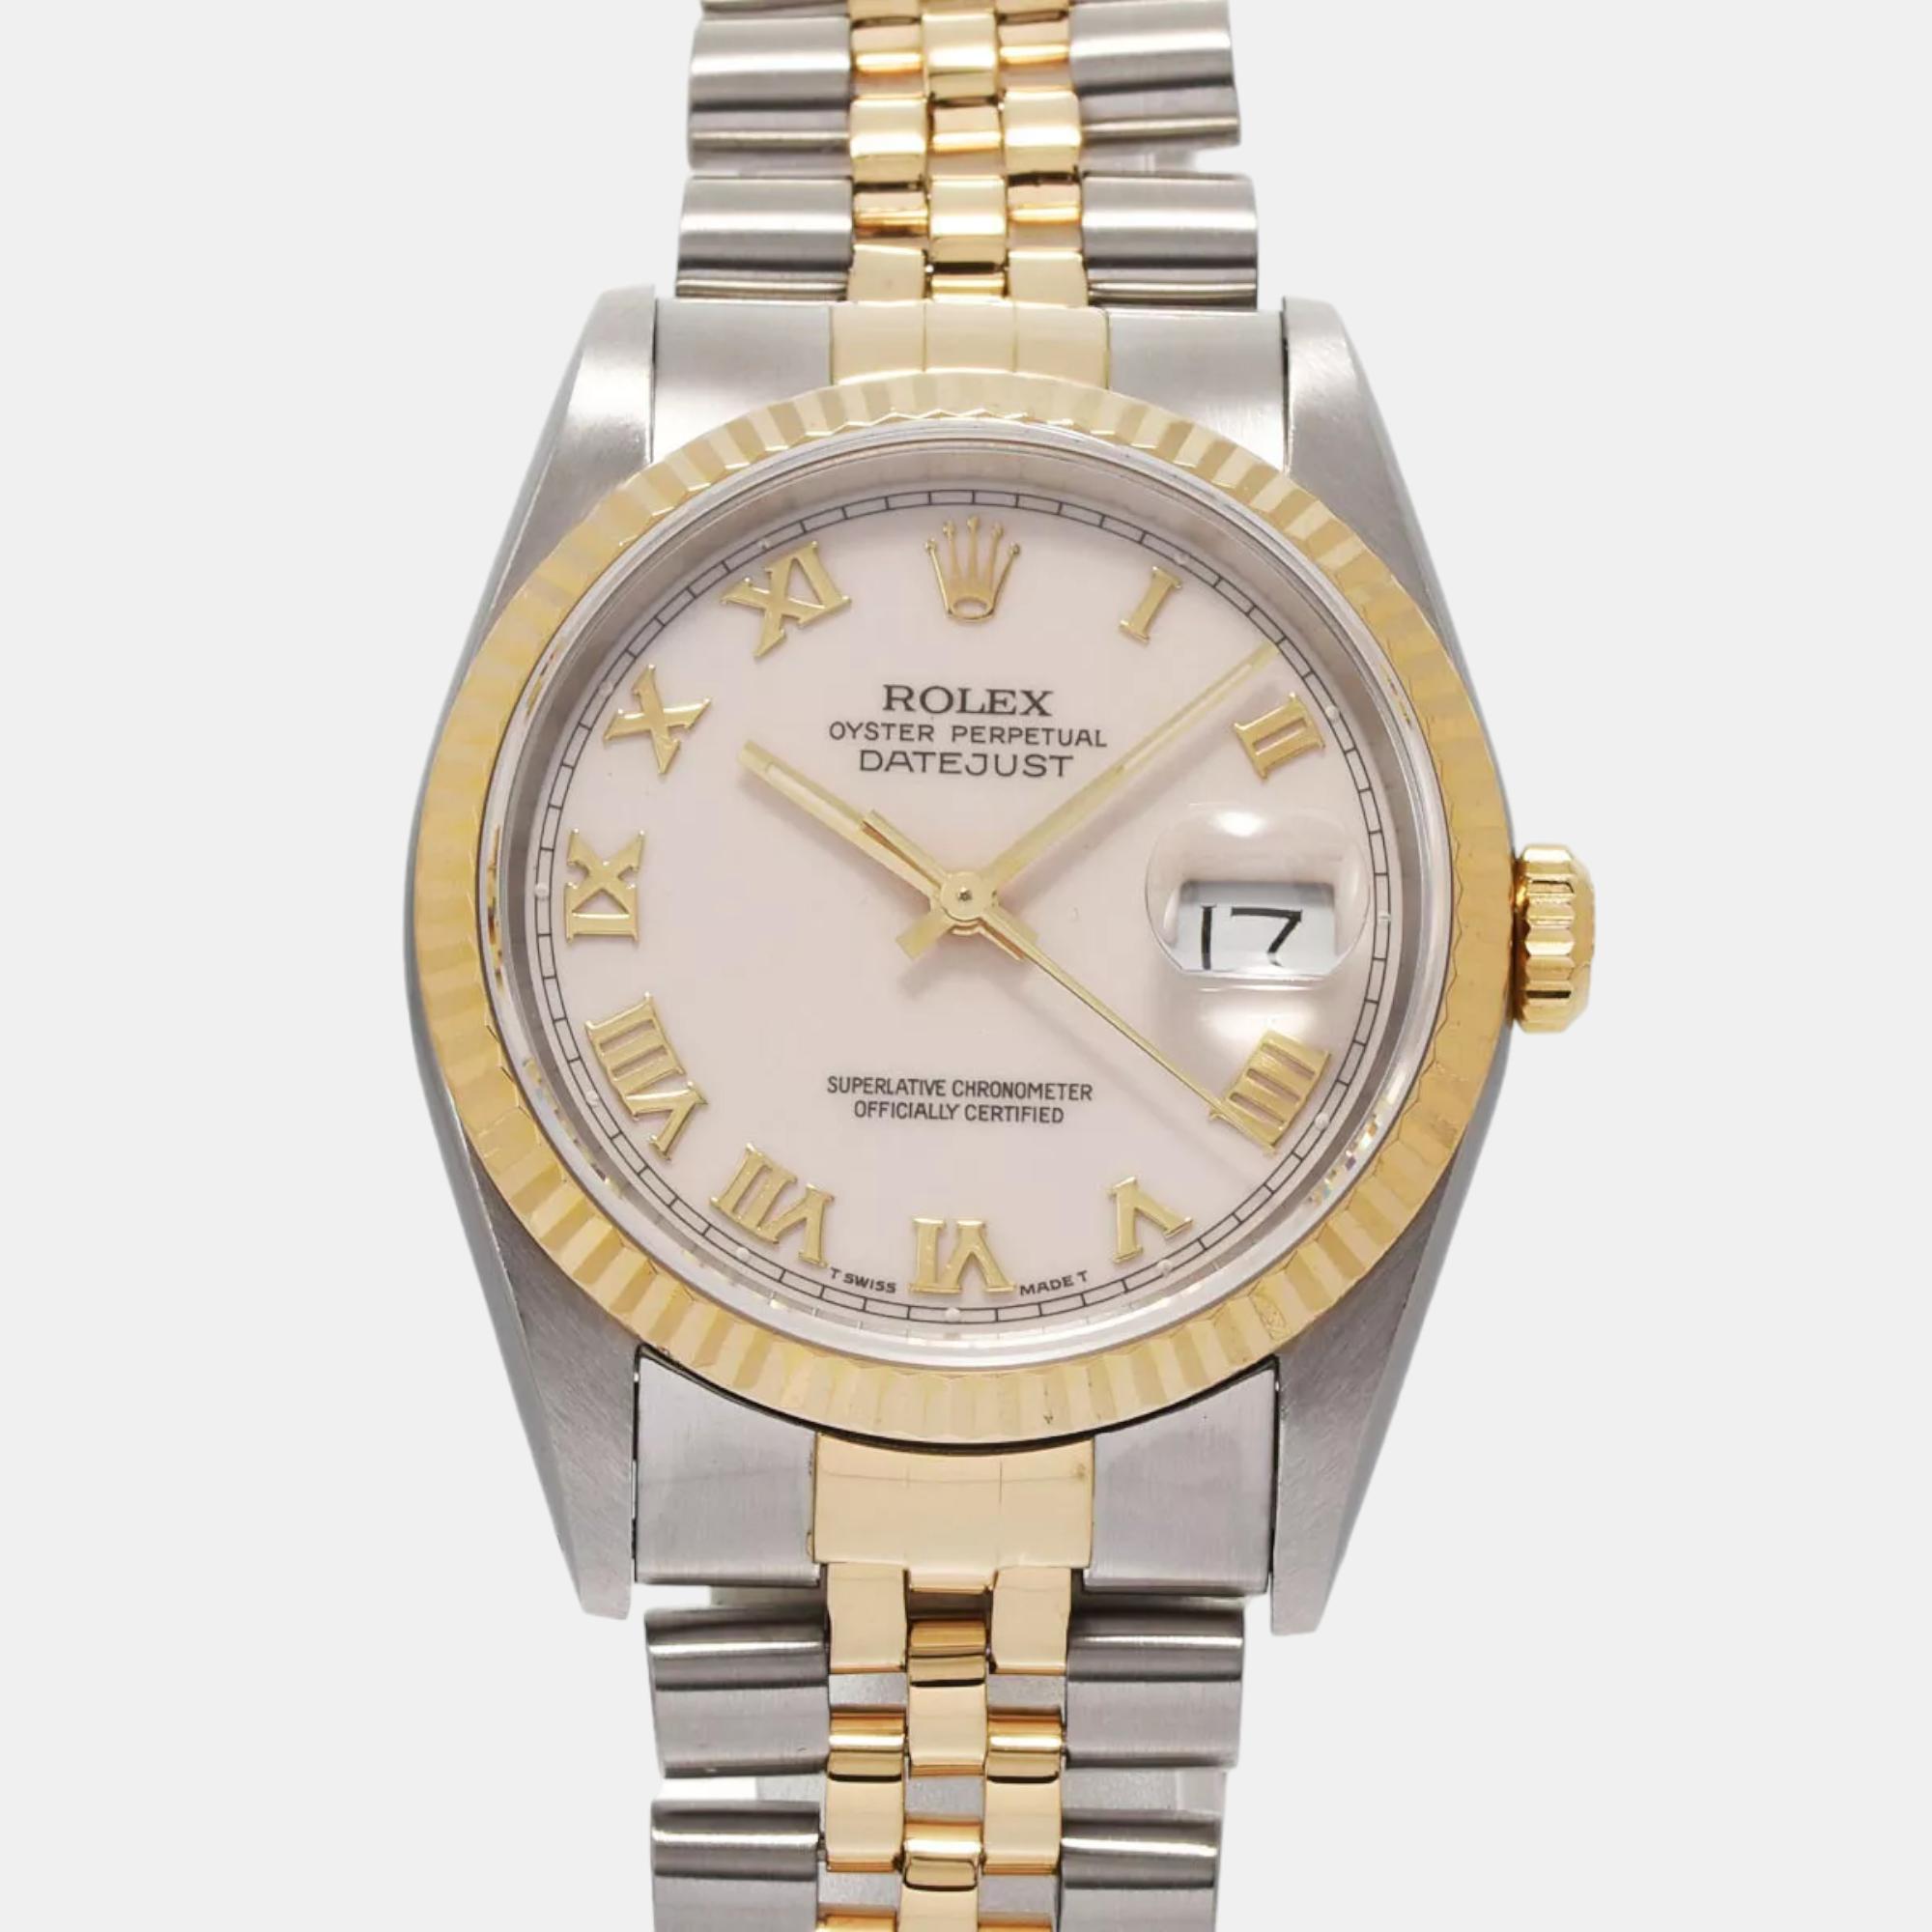 Rolex ivory 18k yellow gold stainless steel datejust 16233 automatic men's wristwatch 36 mm